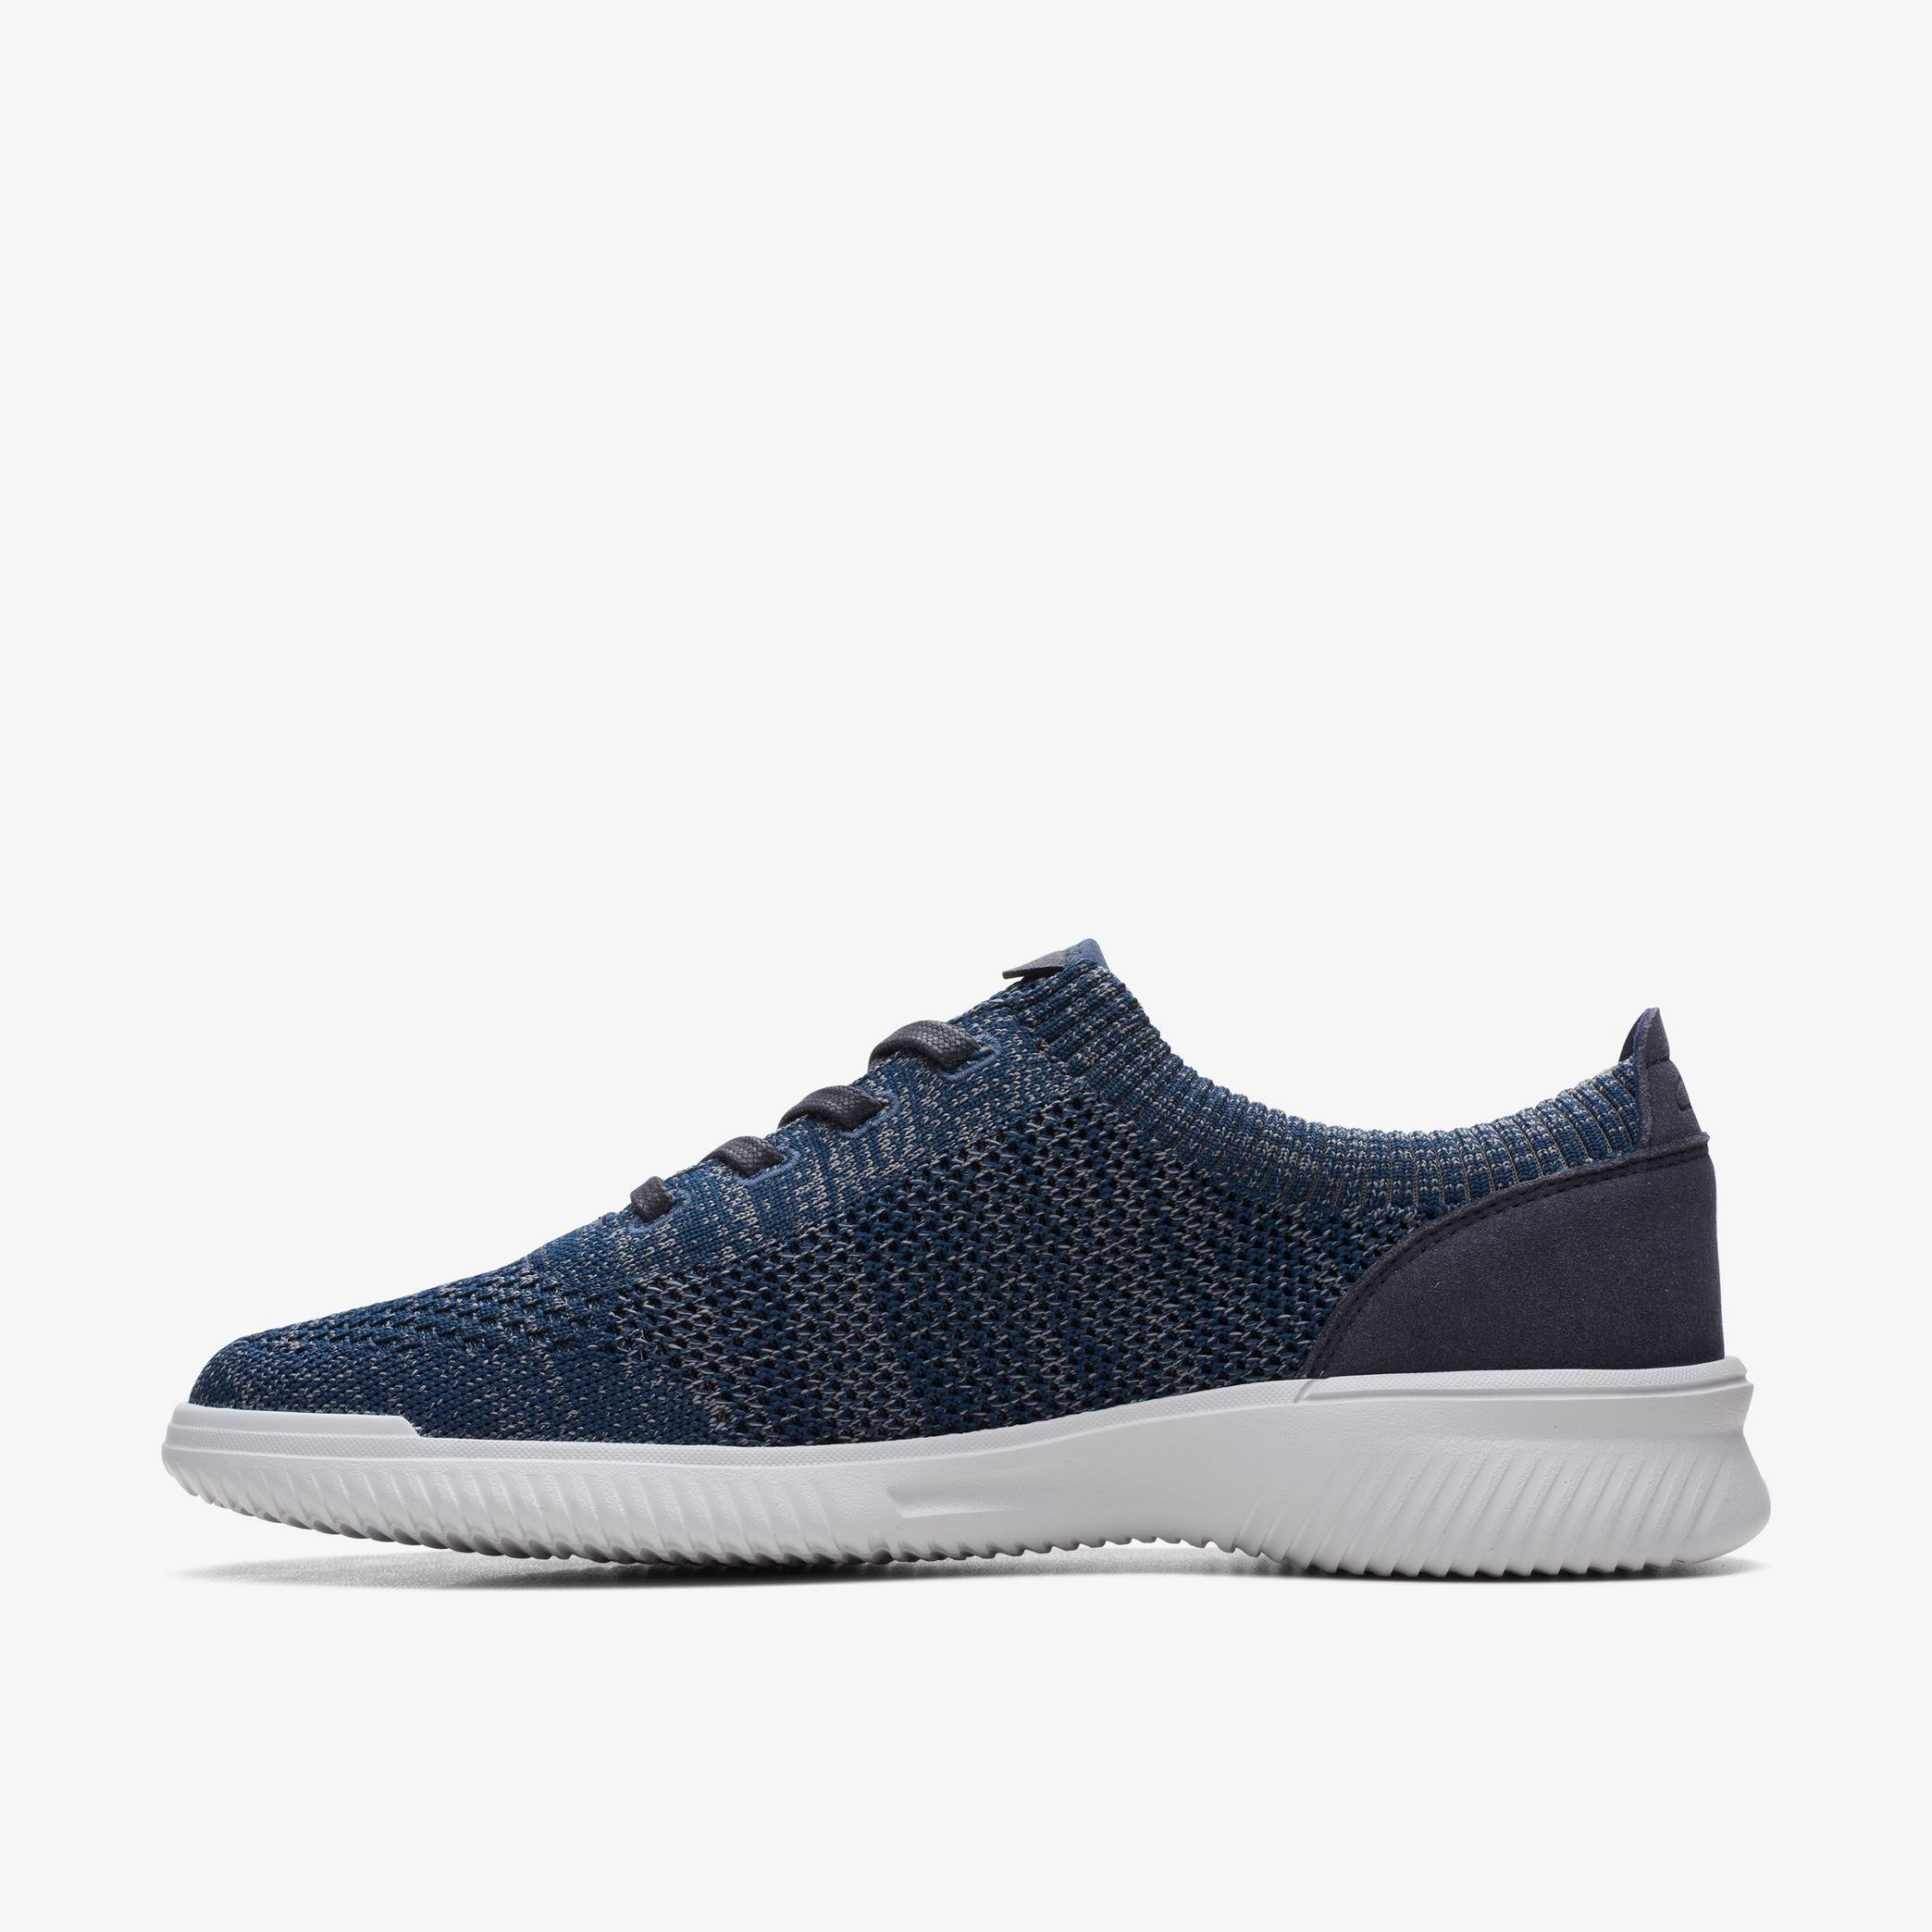 Donaway Knit Navy Knit Trainers, view 2 of 6